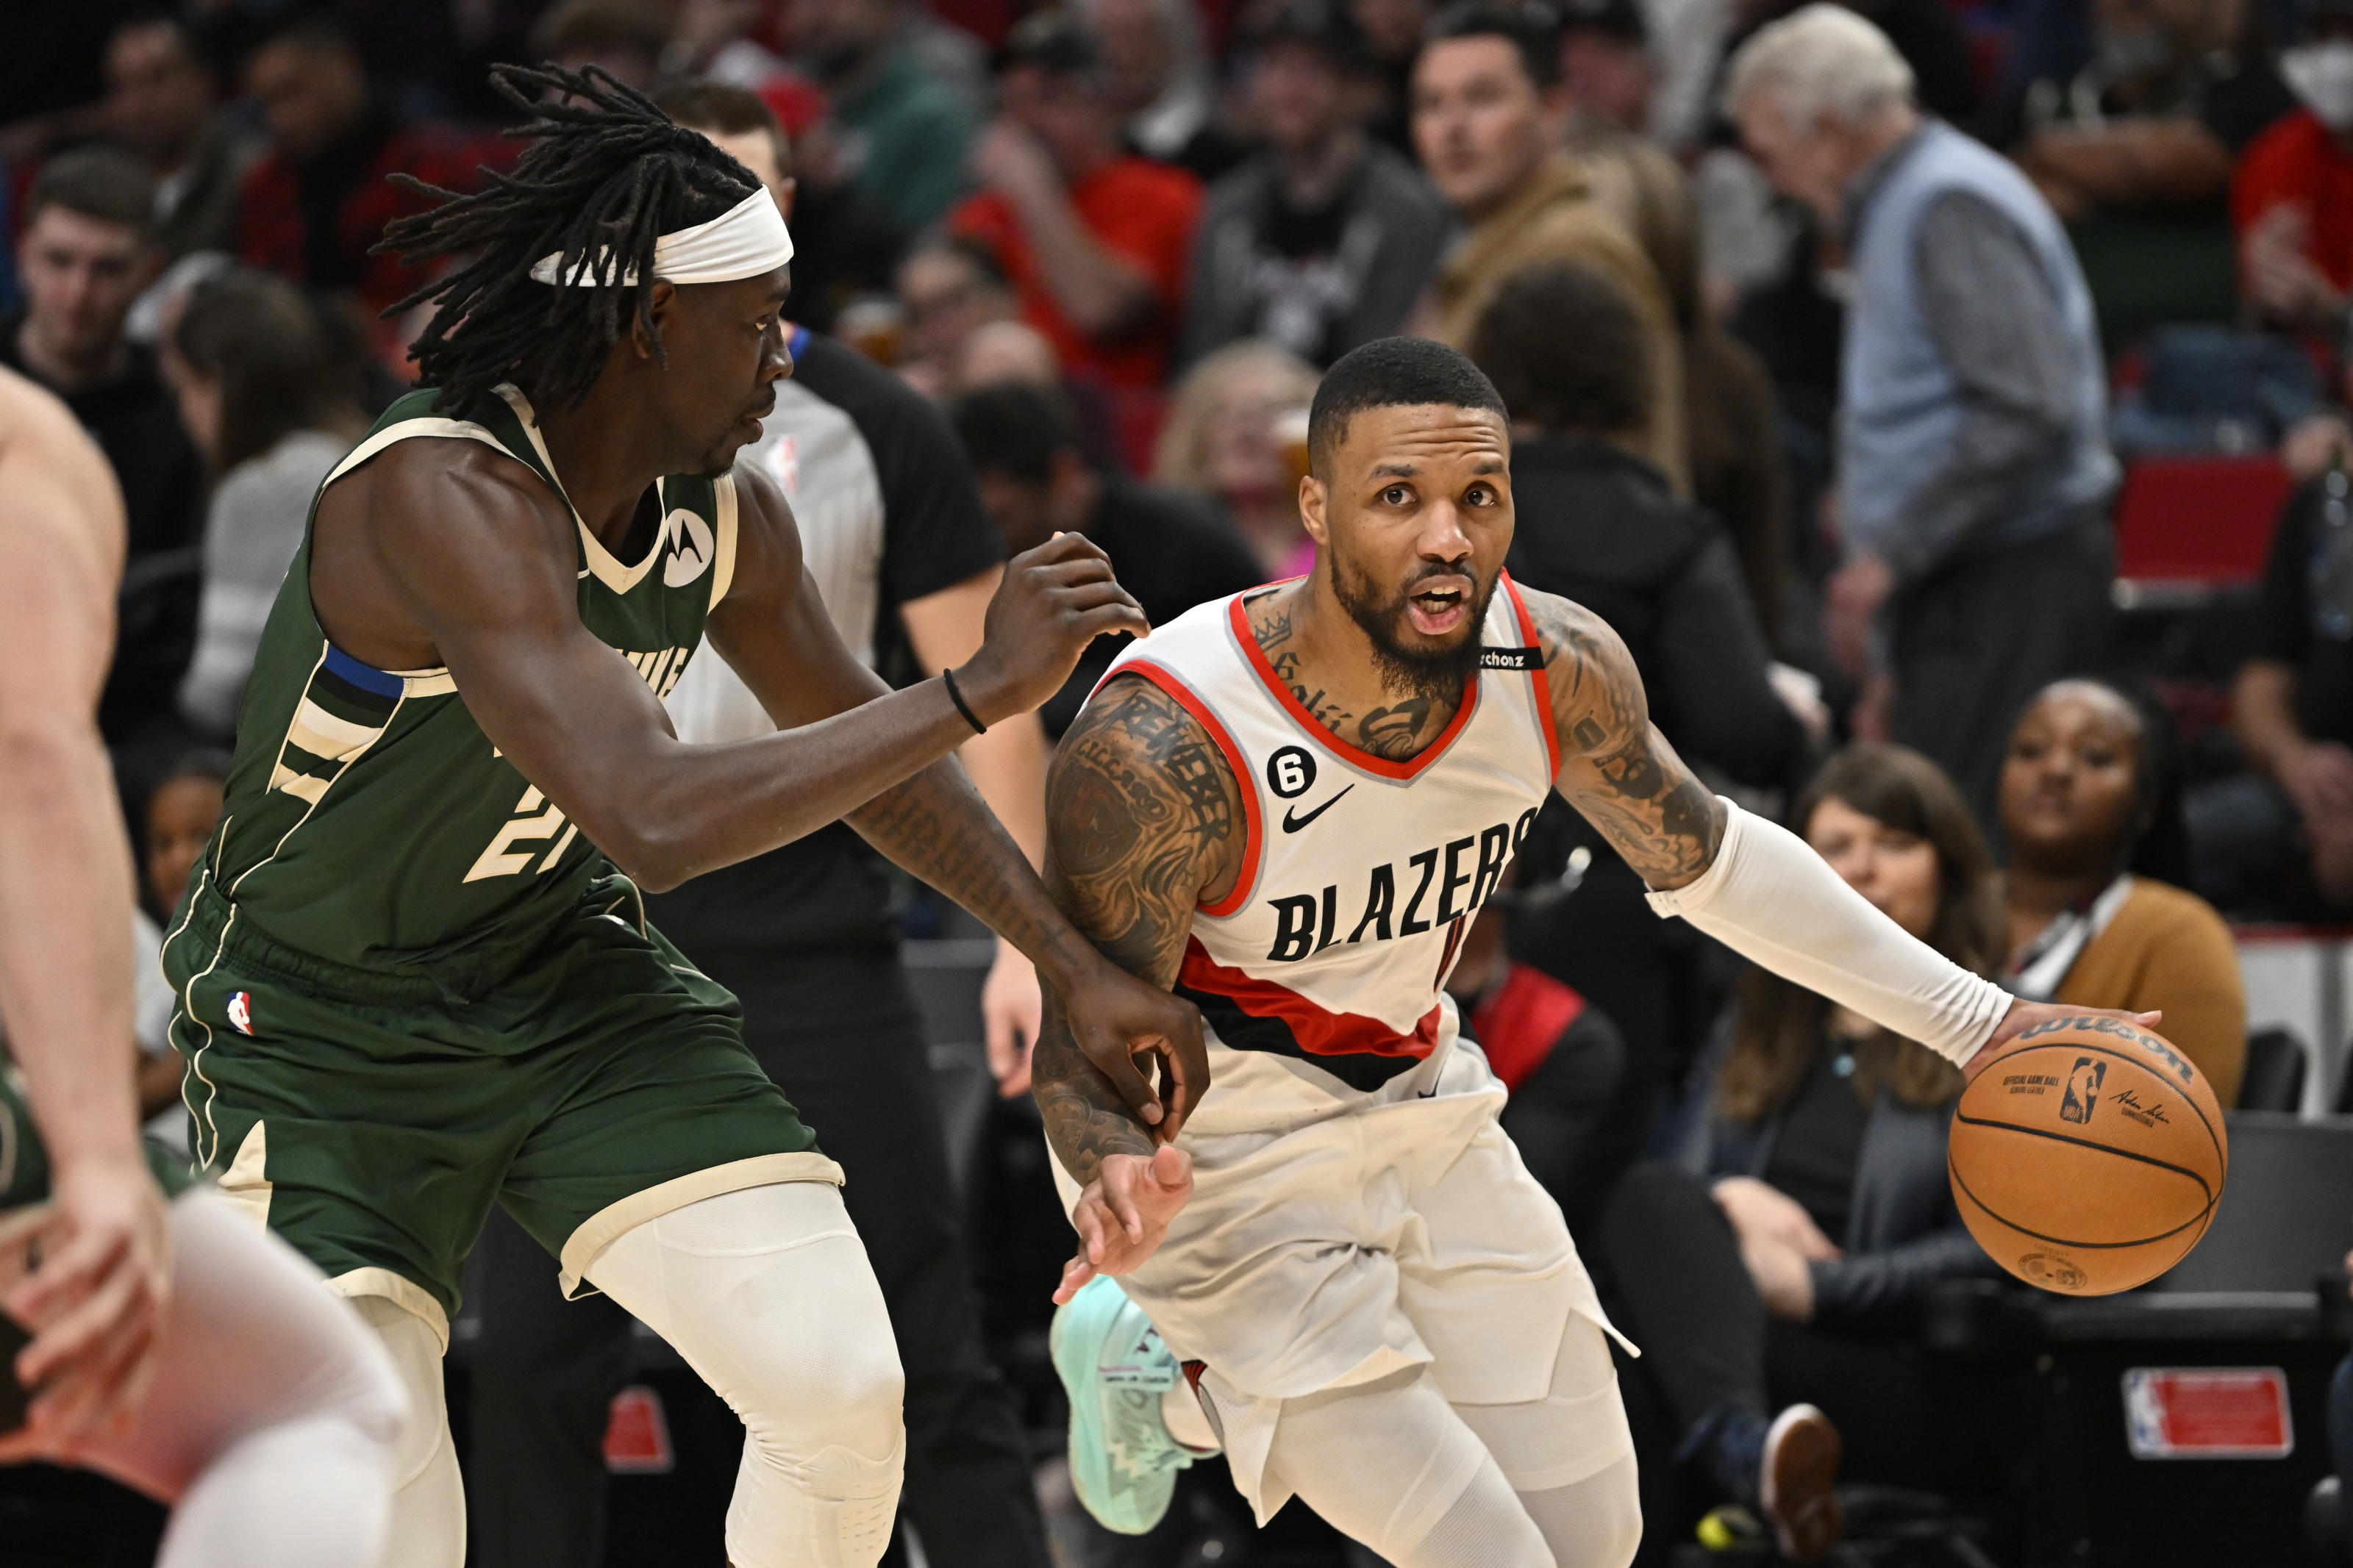 Damian Lillard and Giannis Antetokounmpo are one of NBA's best combos